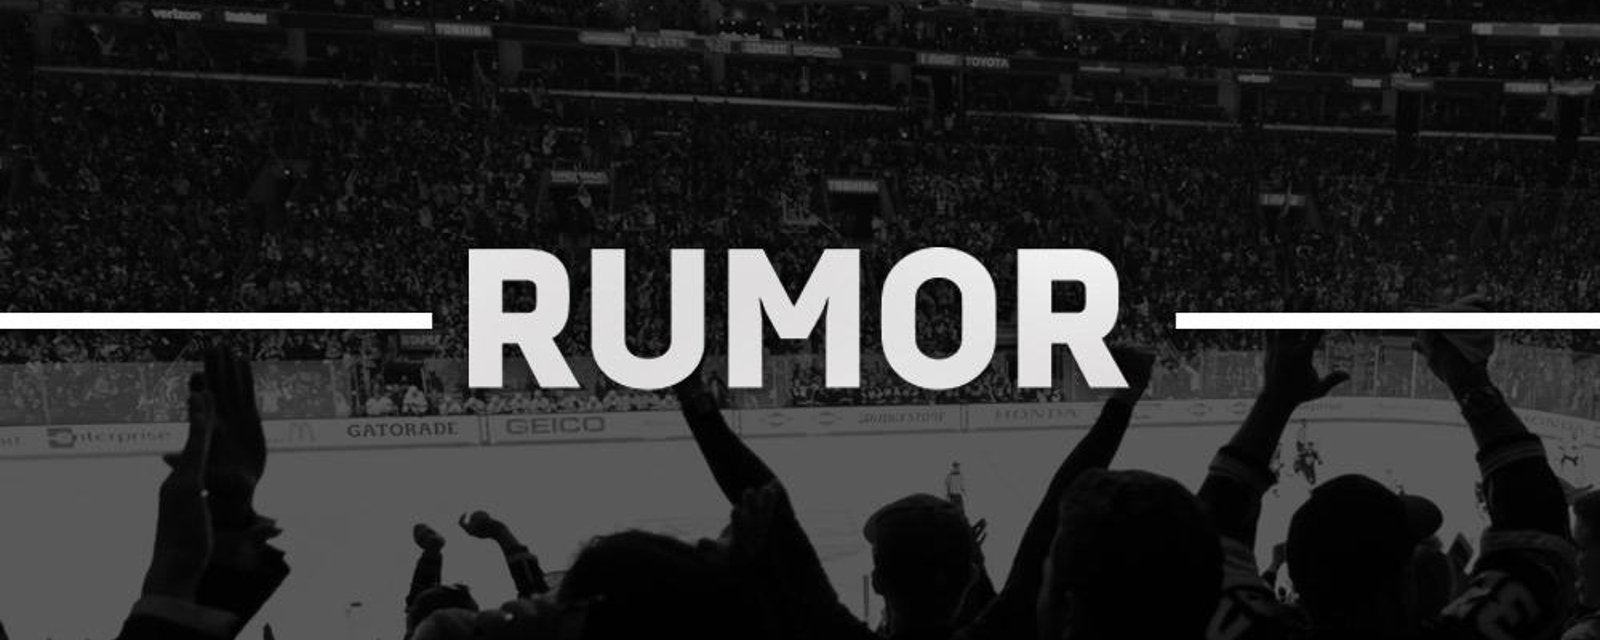 Rumor: Team attempted big player for player deal but has reportedly been turned down.